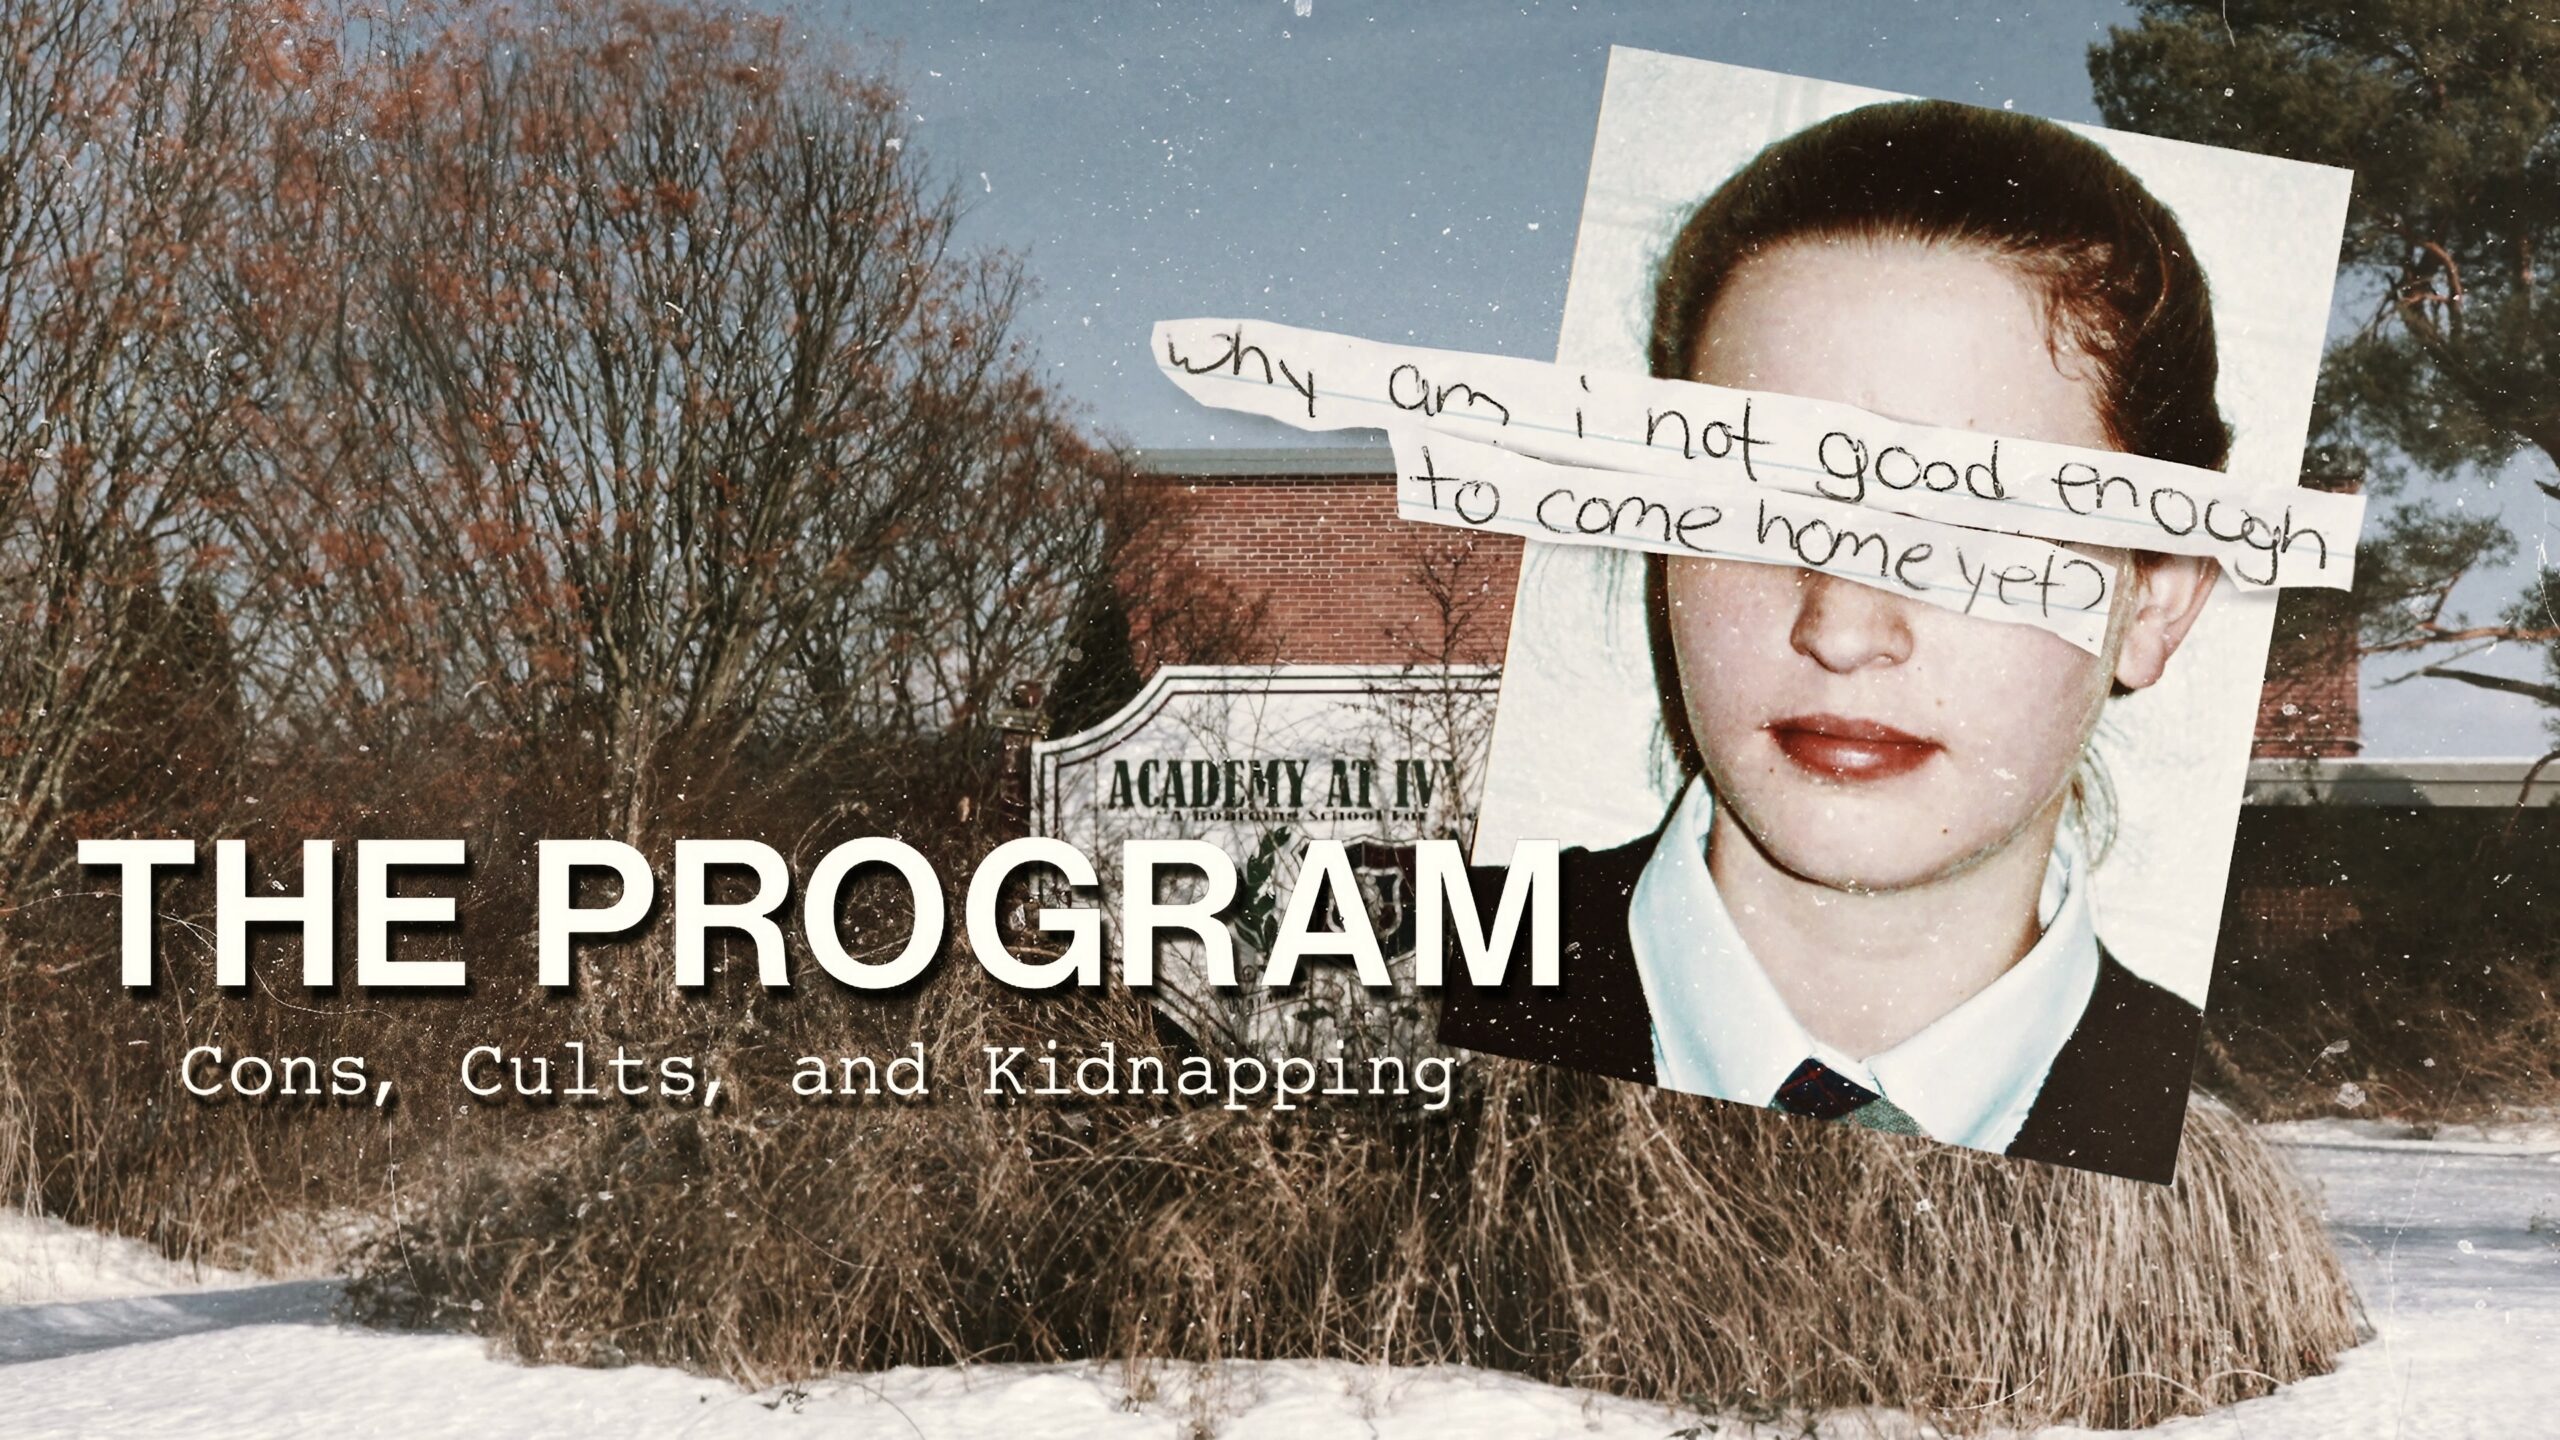 is The Program Cons, Cults and Kidnapping based on a true story